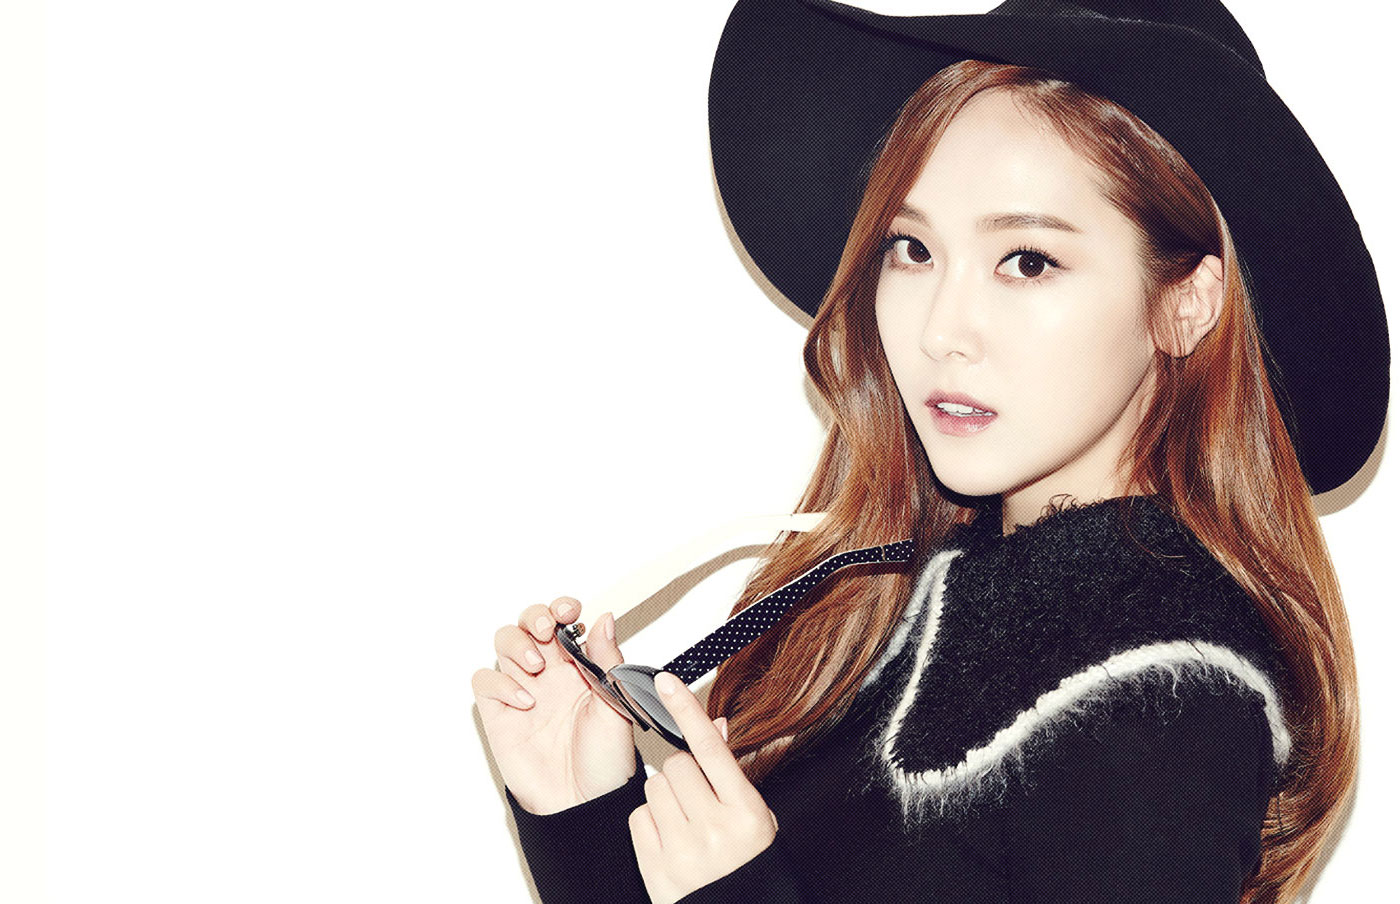 Jessica Snsd For Blanc Eclare